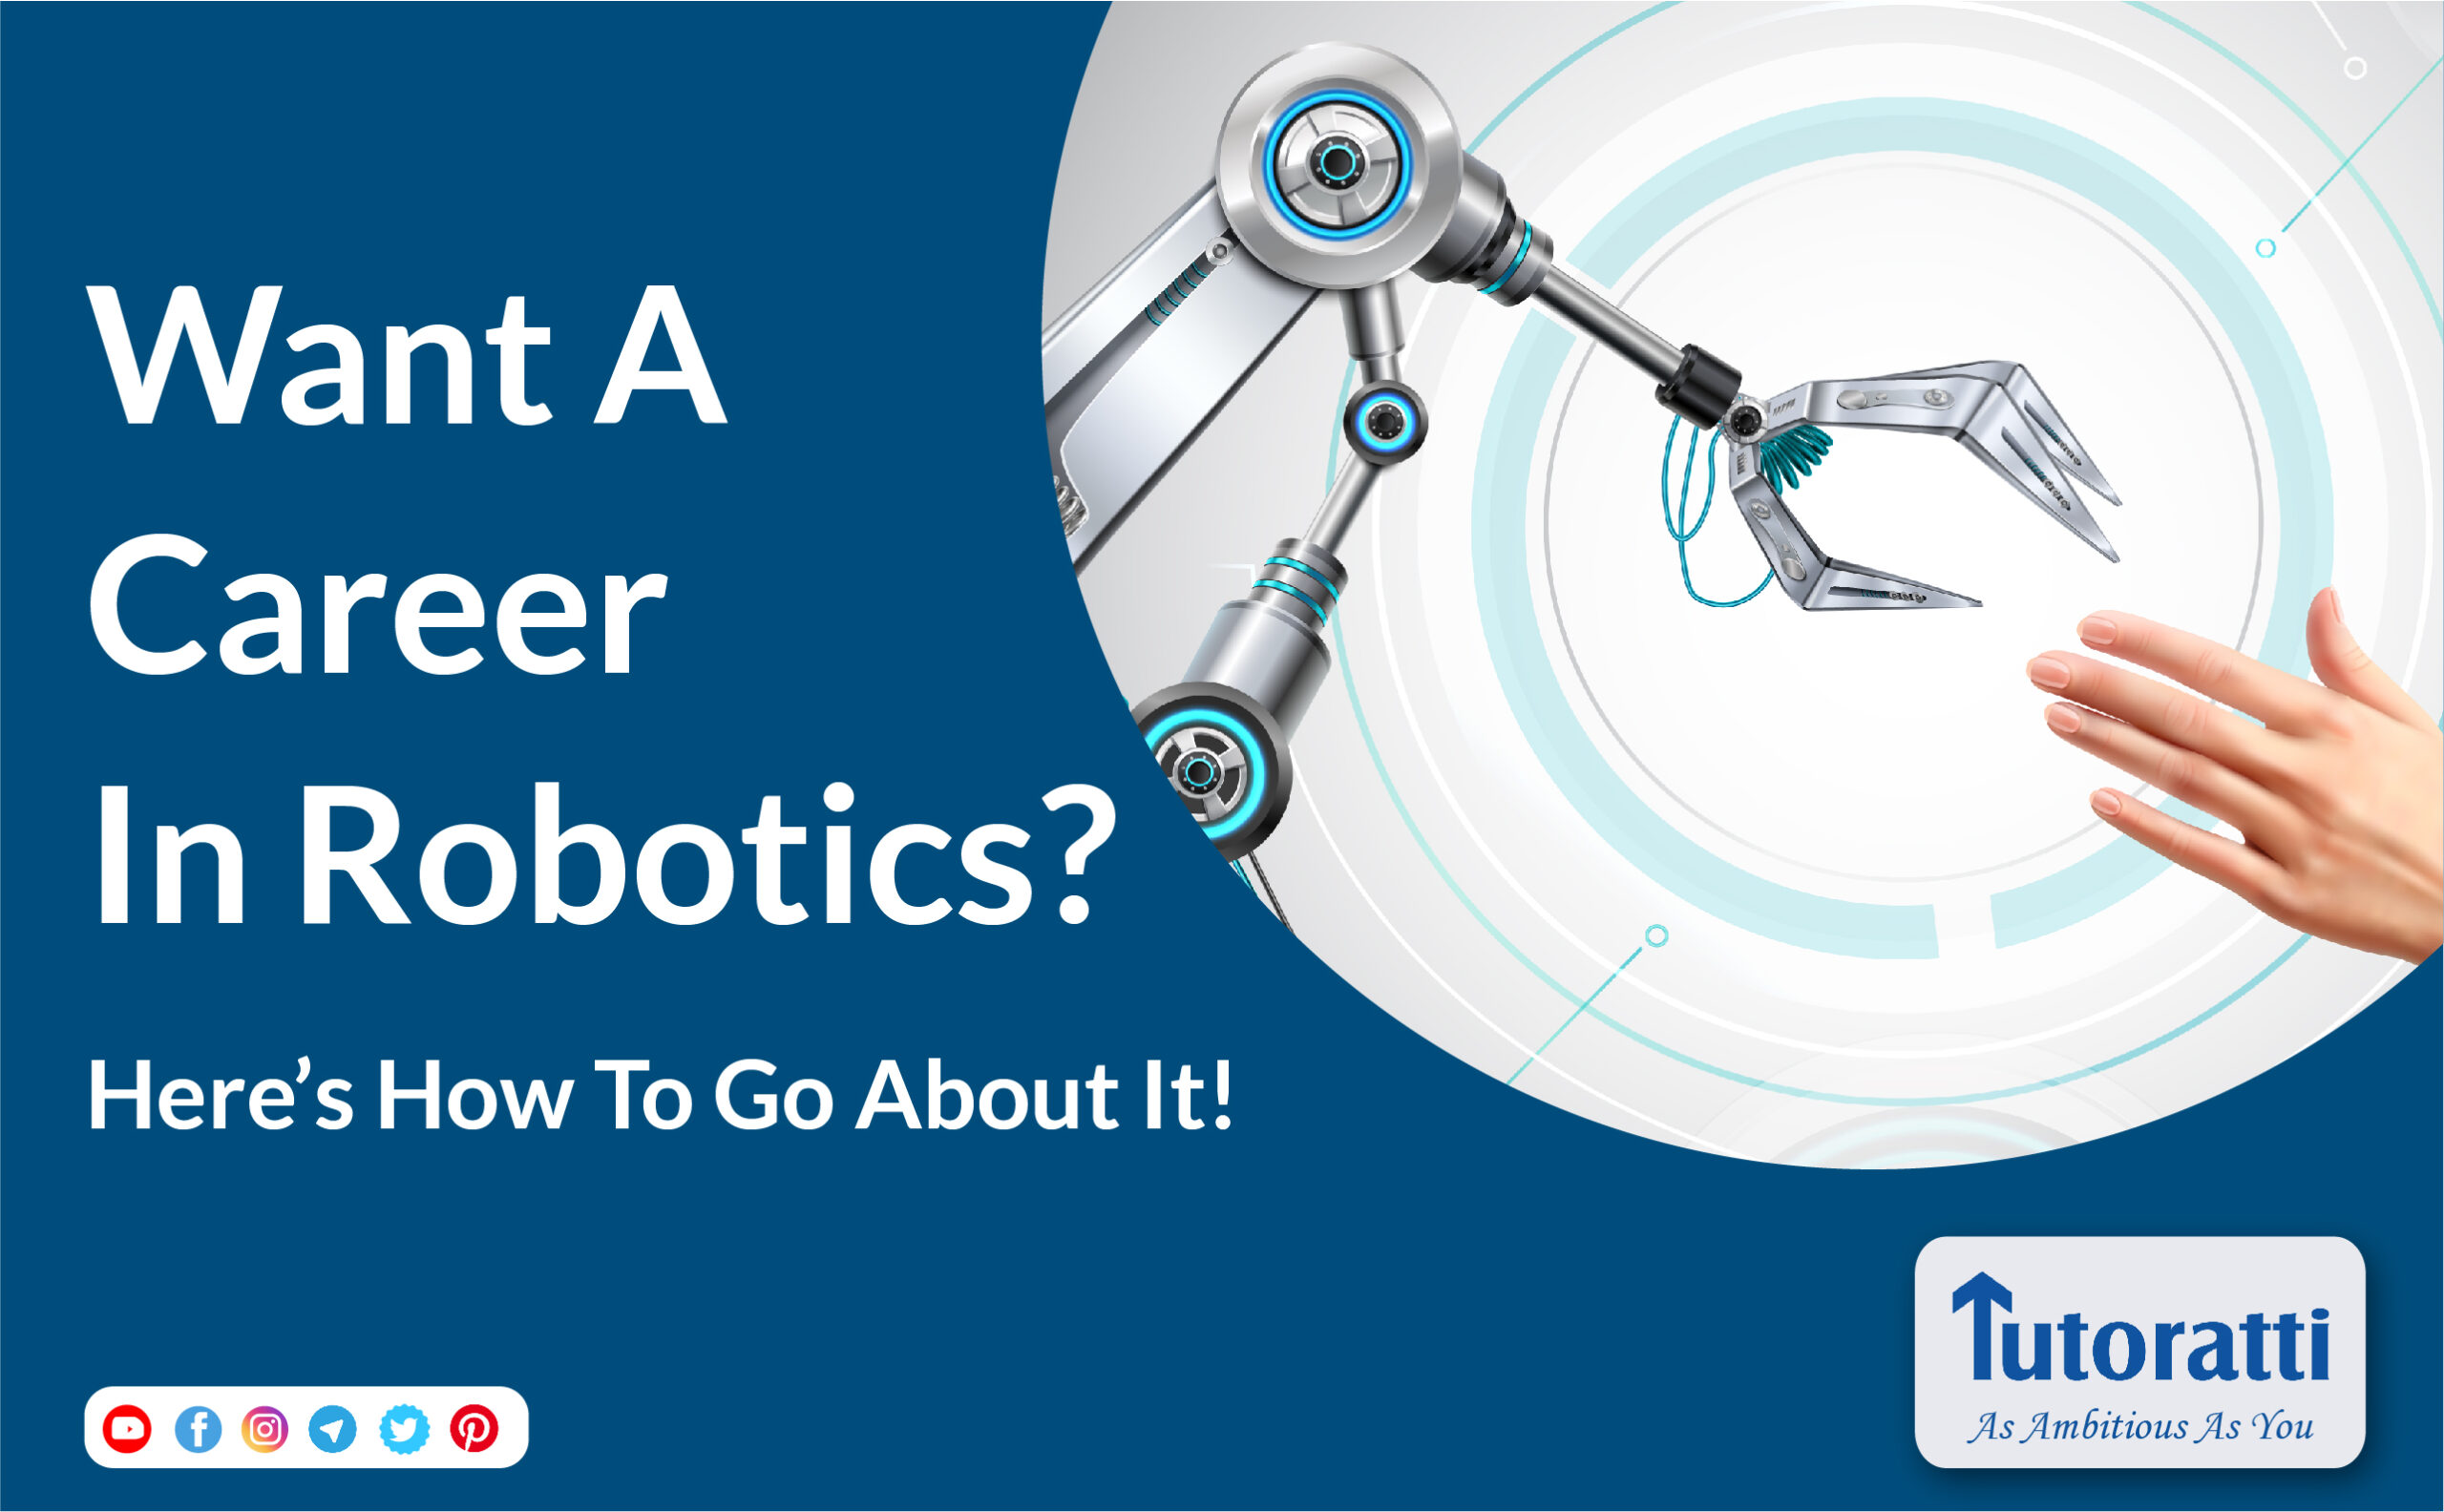 Want A Career In Robotics? Here’s How To Go About It!